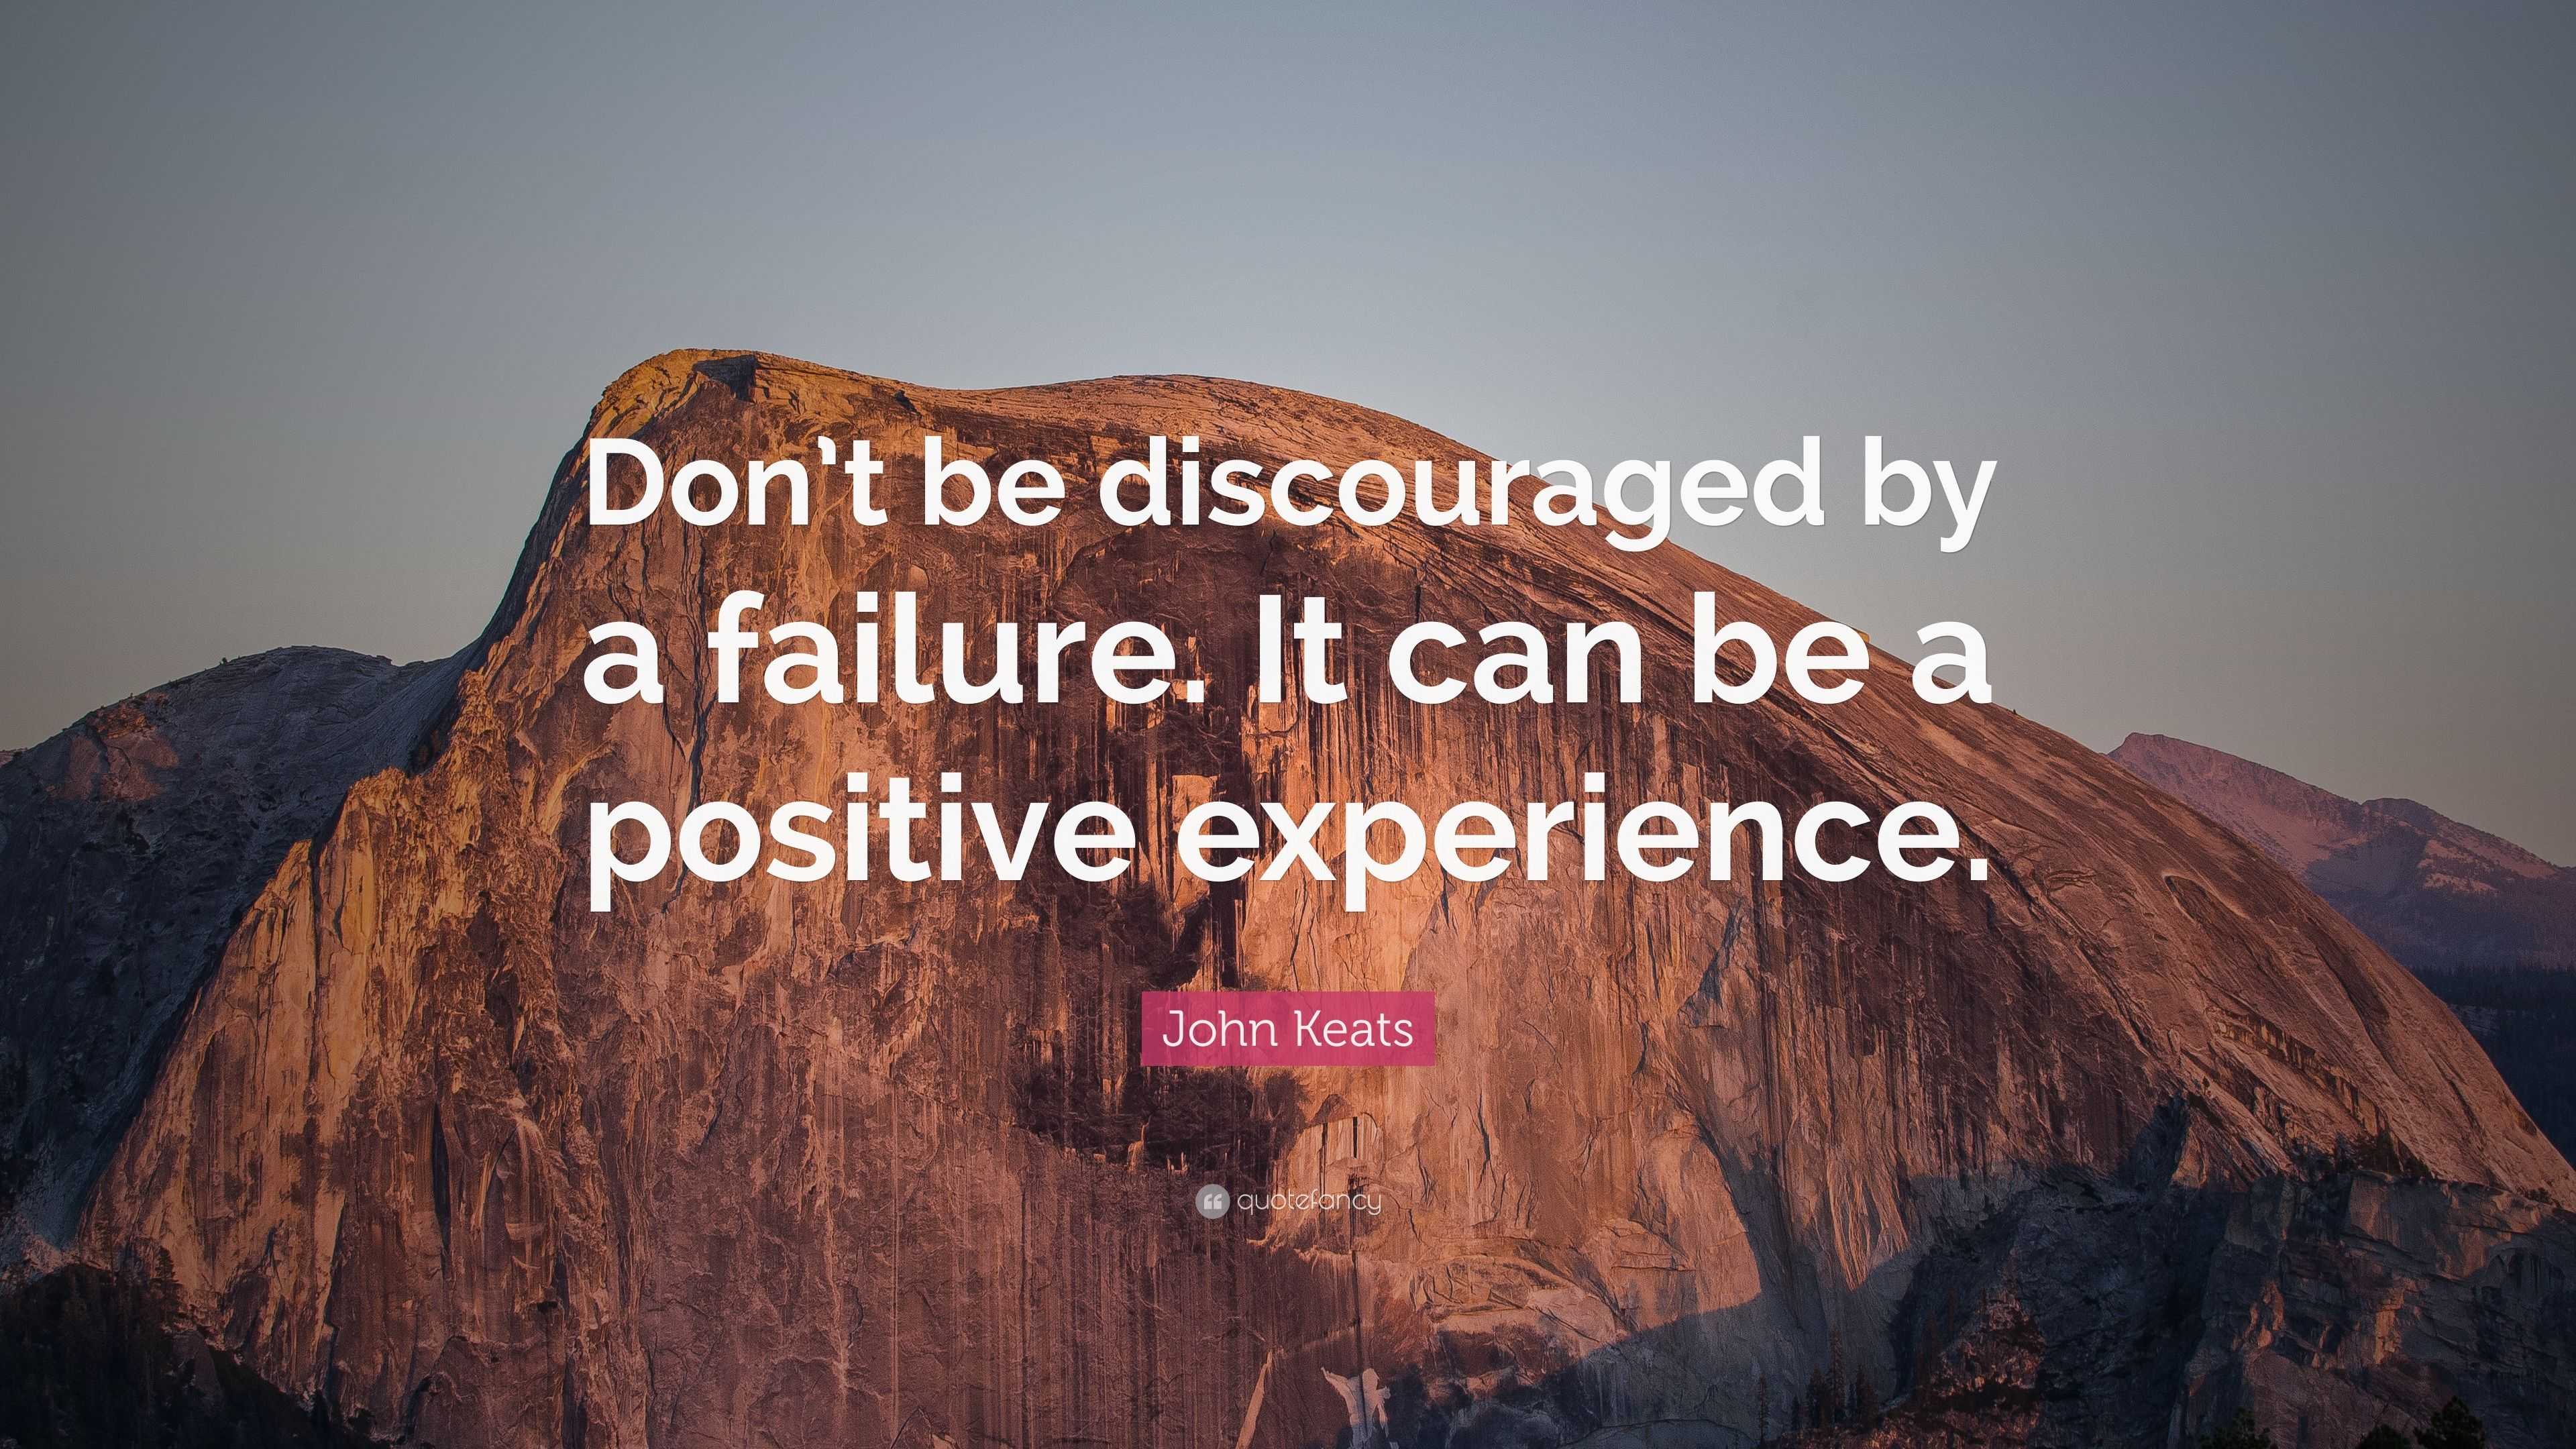 John Keats Quote: “Don’t be discouraged by a failure. It can be a